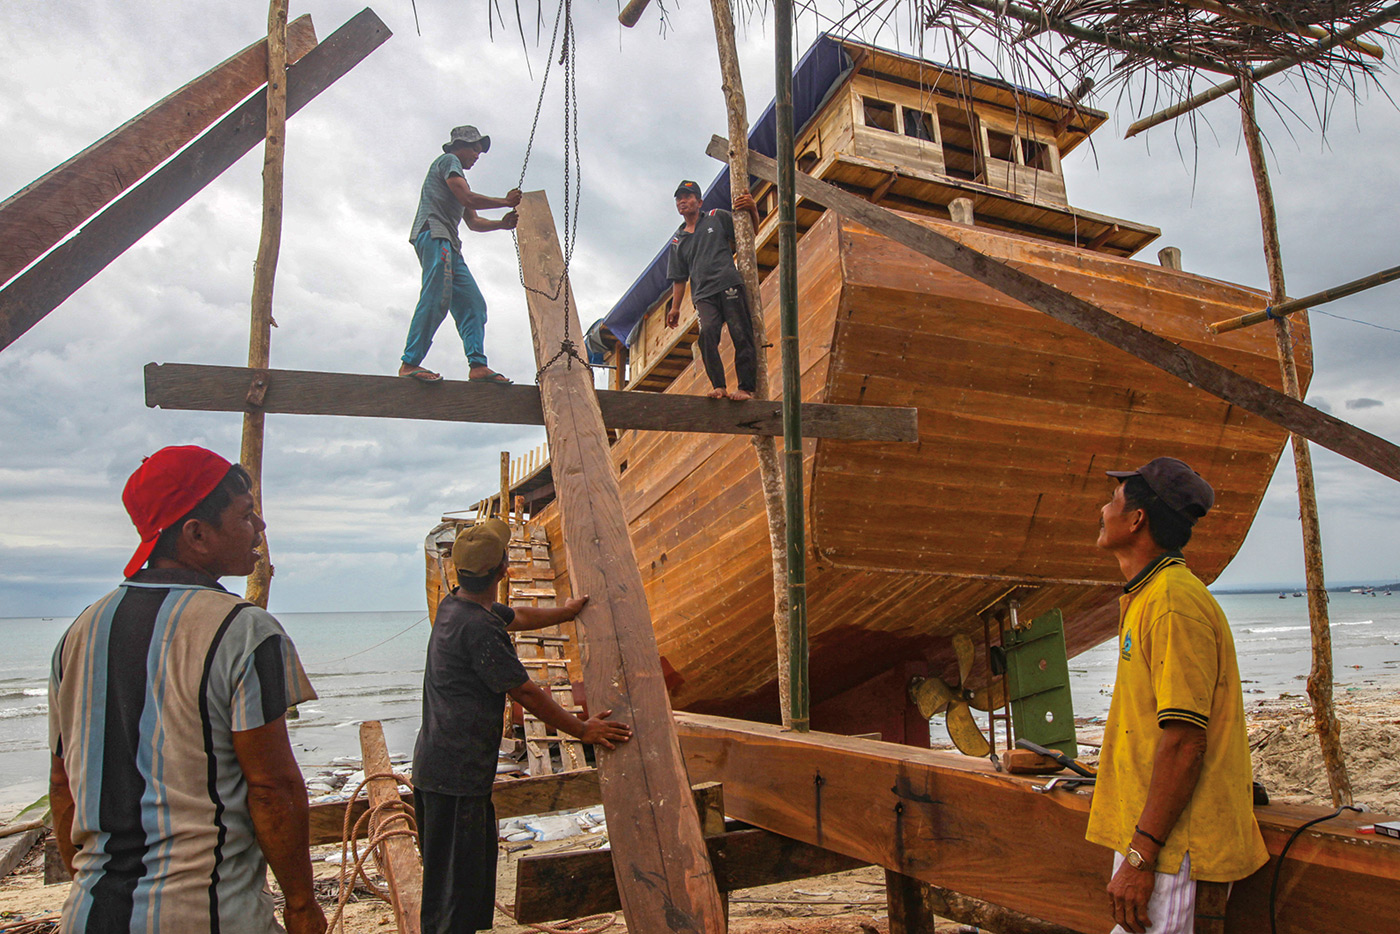 Shipbuilders construct a traditional Pinisi boat in Tana Beru, on Indonesia's South Sulawesi island. - The iconic schooners, known as Pinisi, have given the builders a reputation as master craftsmen and some of the best sailors in the world.